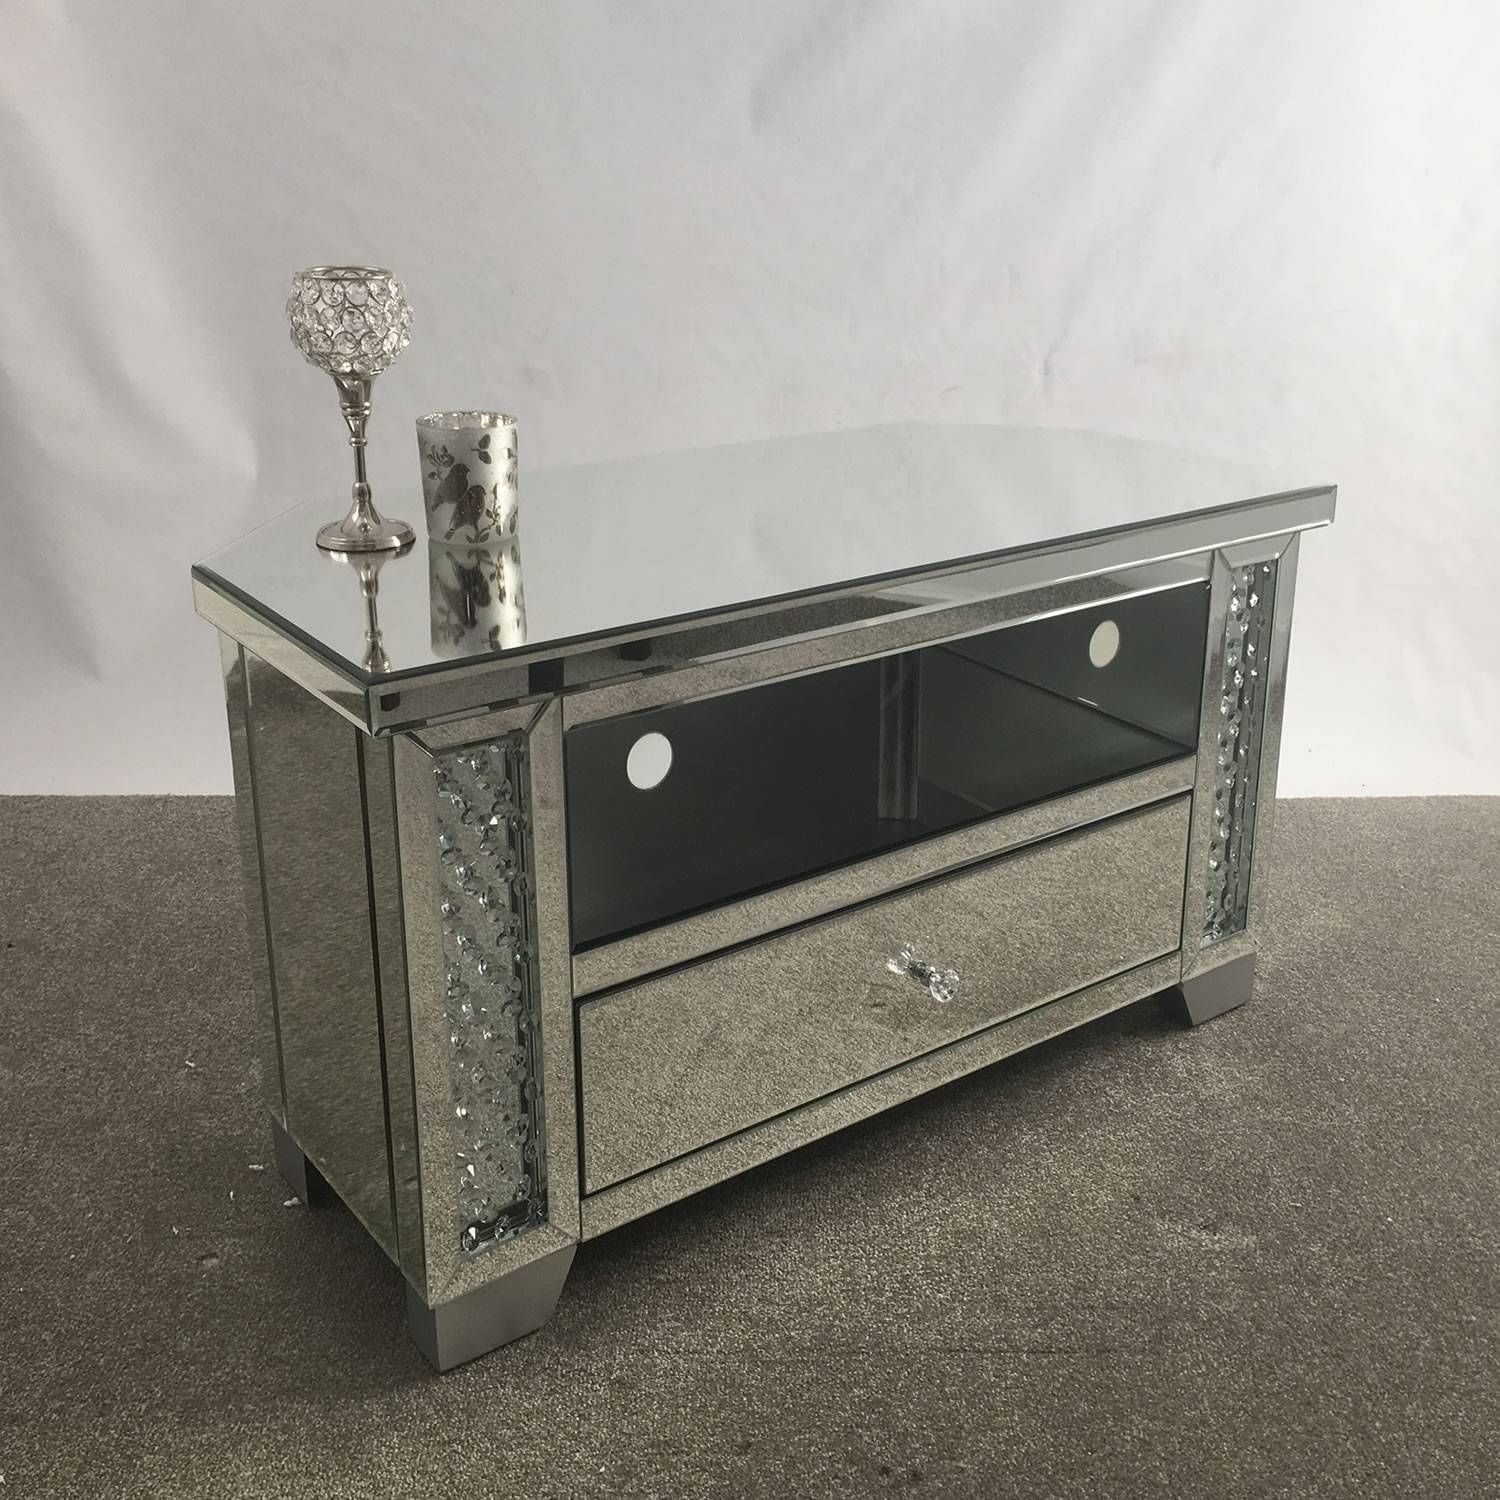 Tv : 100cm Tv Stands Extraordinary 100 Cm Long Tv Stands‚ Fearsome Pertaining To 100cm Tv Stands (View 9 of 15)